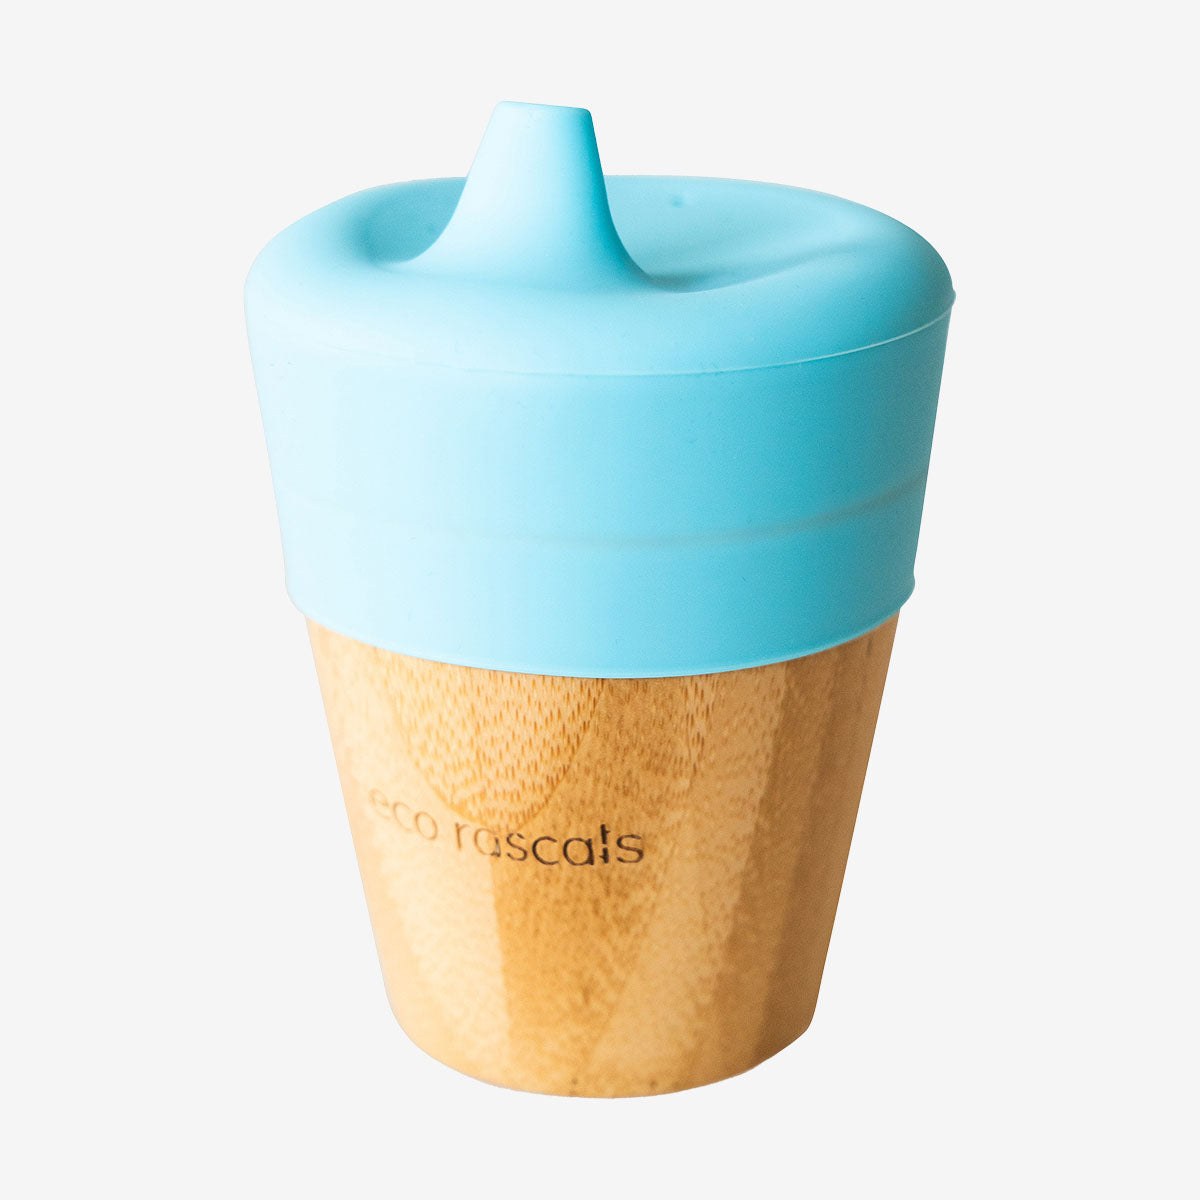 Eco Rascals 190ml Bamboo Sippy Cup – Blue